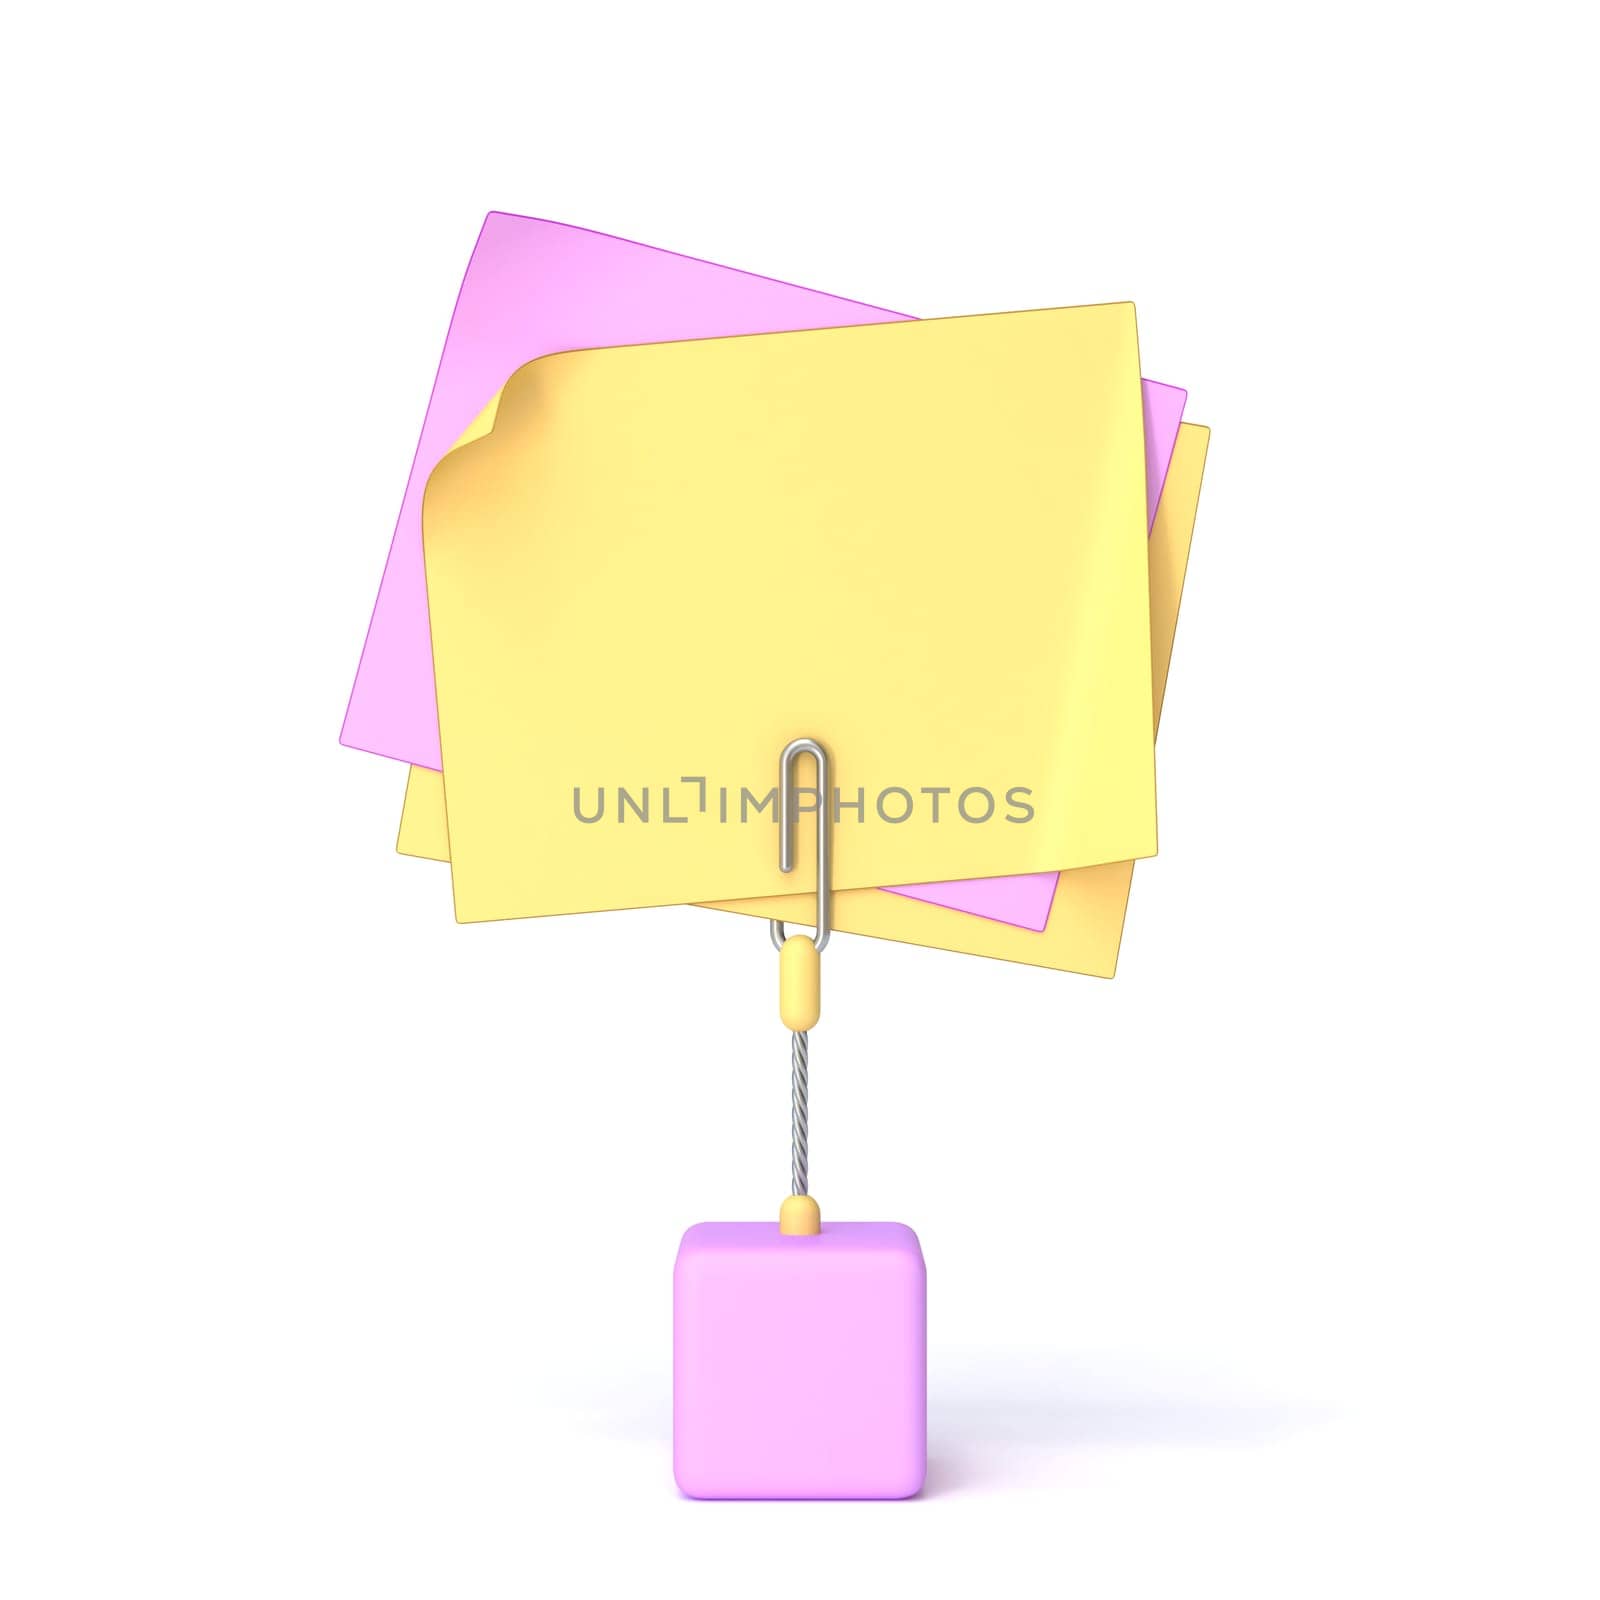 Message card holder with pink base 3D rendering illustration isolated on white background